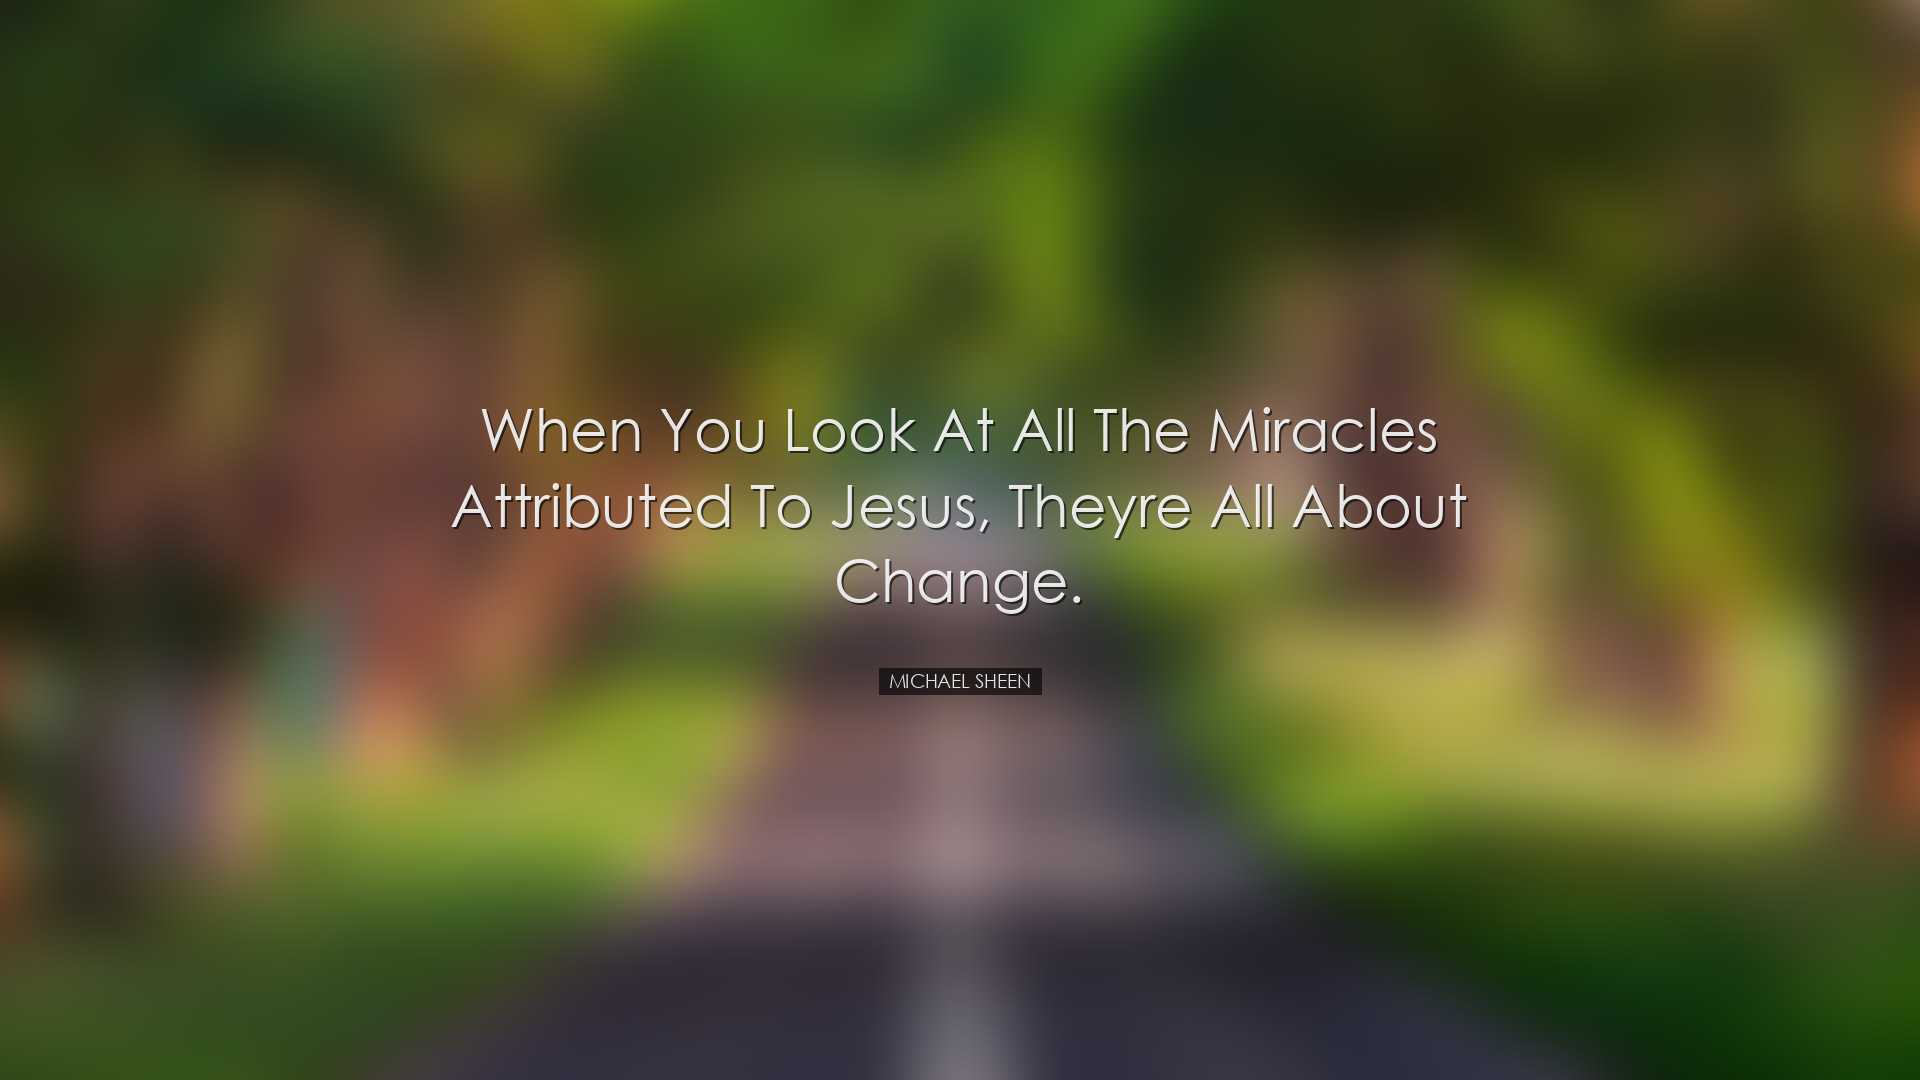 When you look at all the miracles attributed to Jesus, theyre all